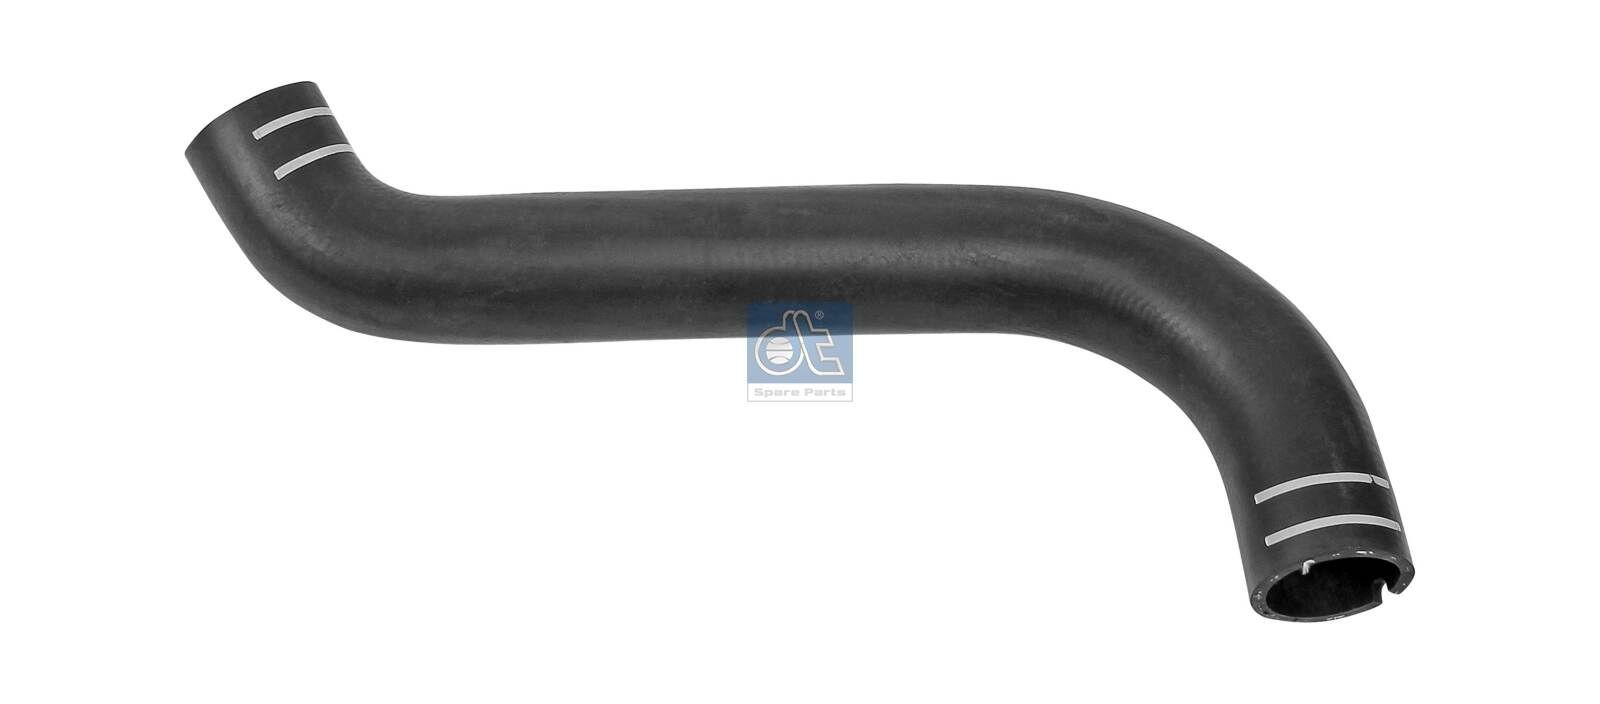 481334 Radiator Hose DT Spare Parts 4.81334 review and test